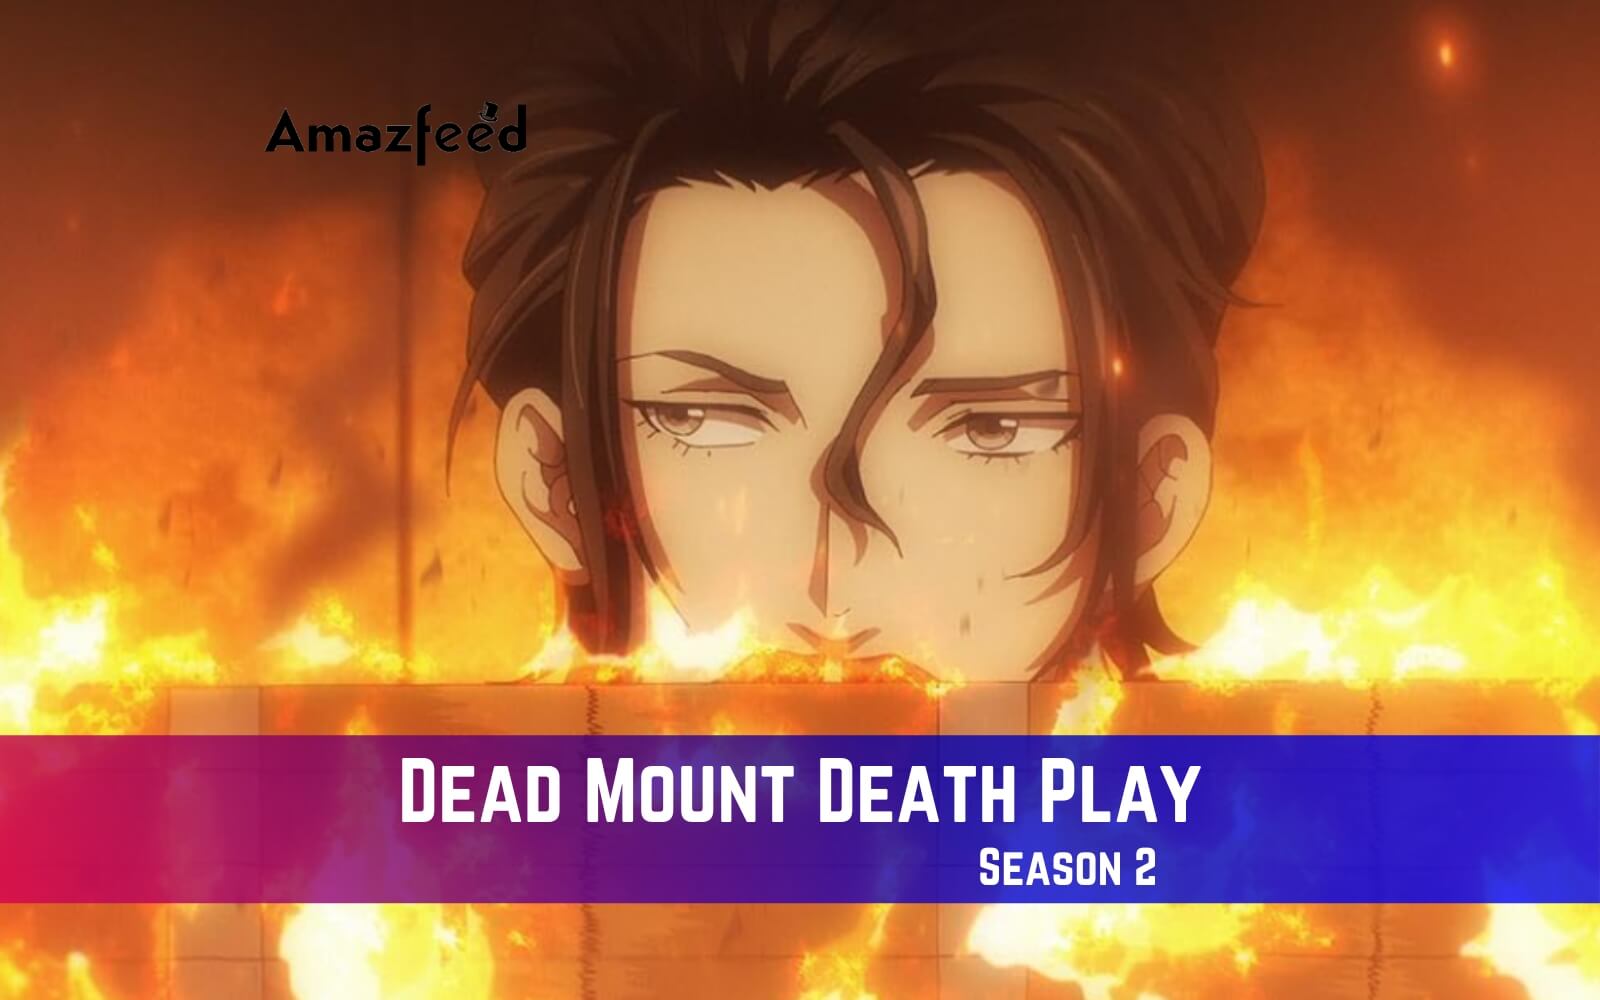 Dead Mount Death Play Part 2 releases today- Exact release time